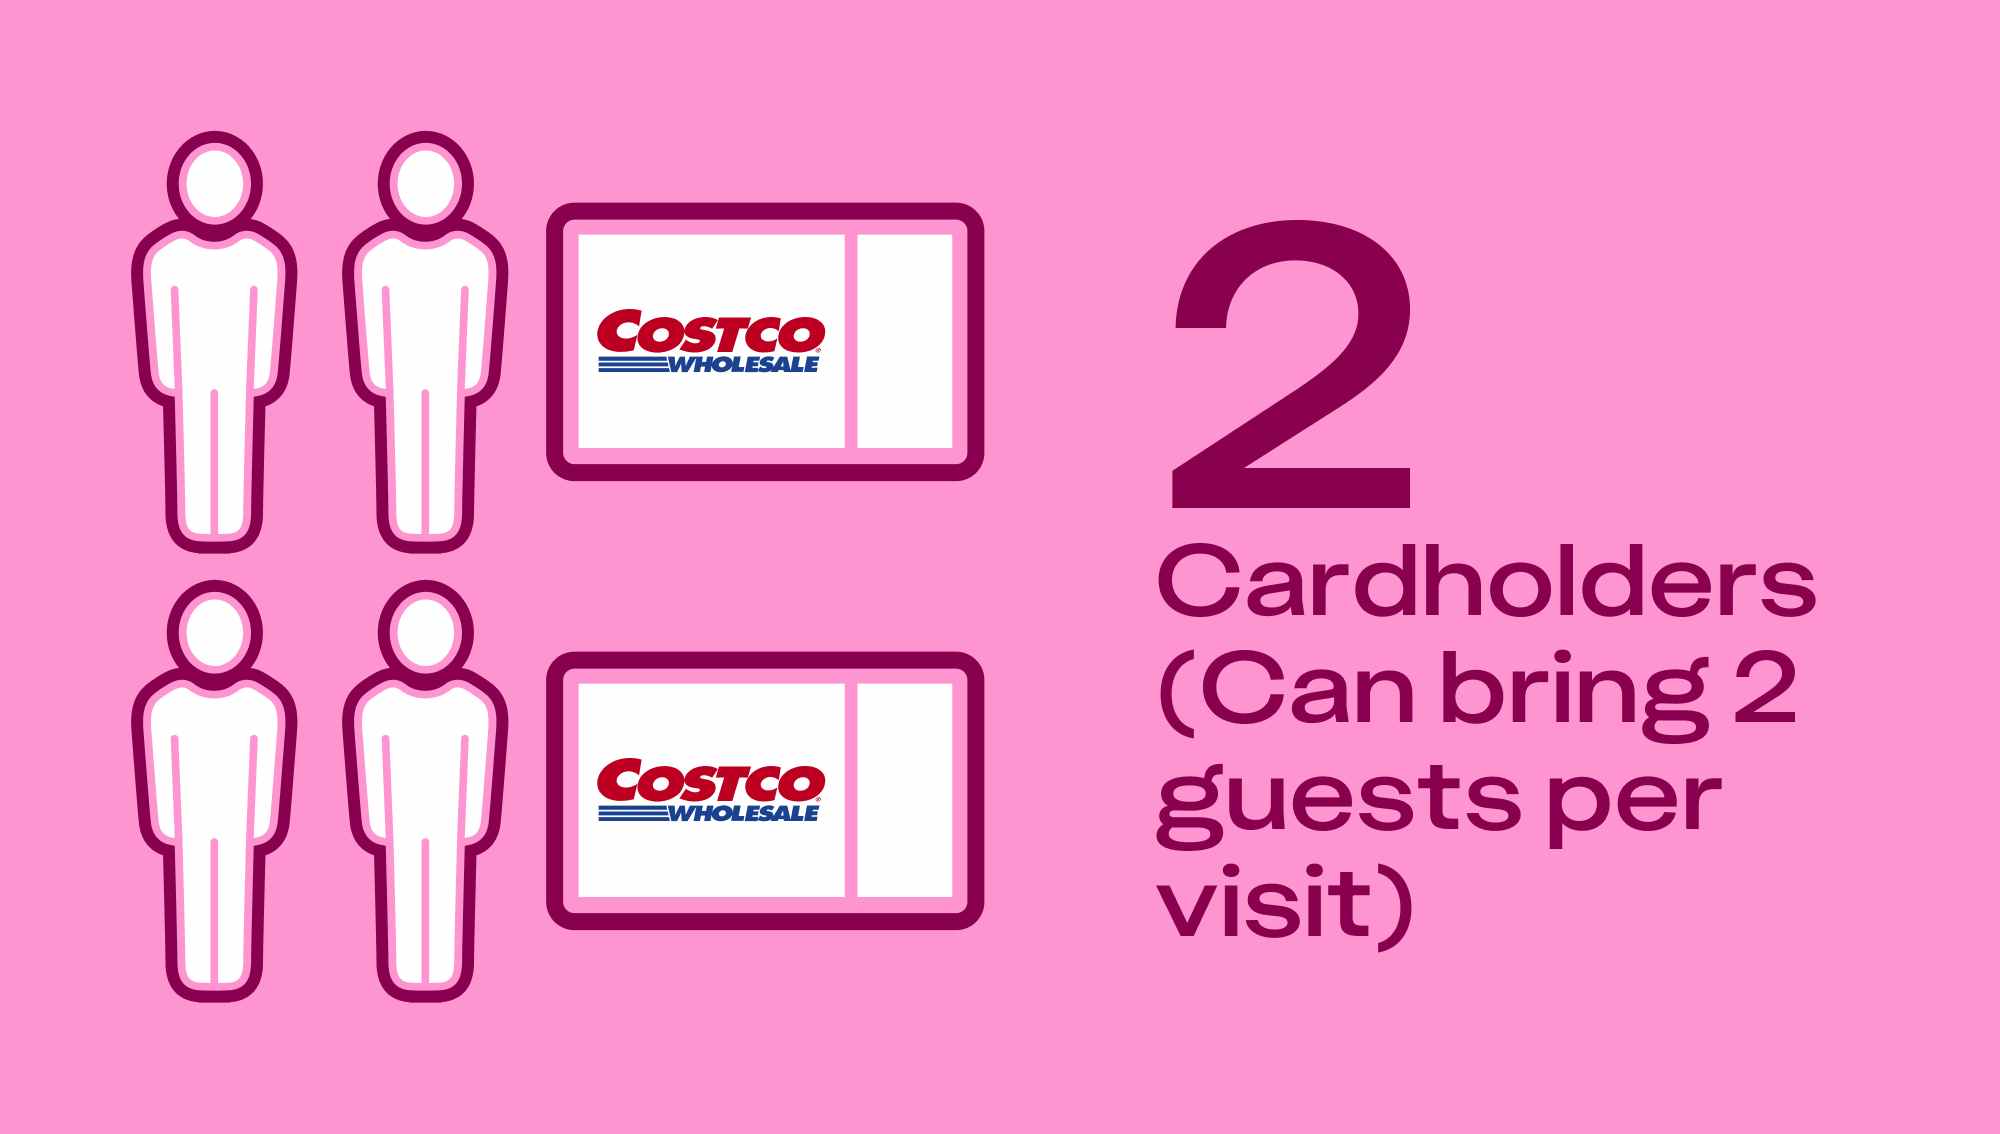 Costco gives cards to 2 cardholders, who can bring guests